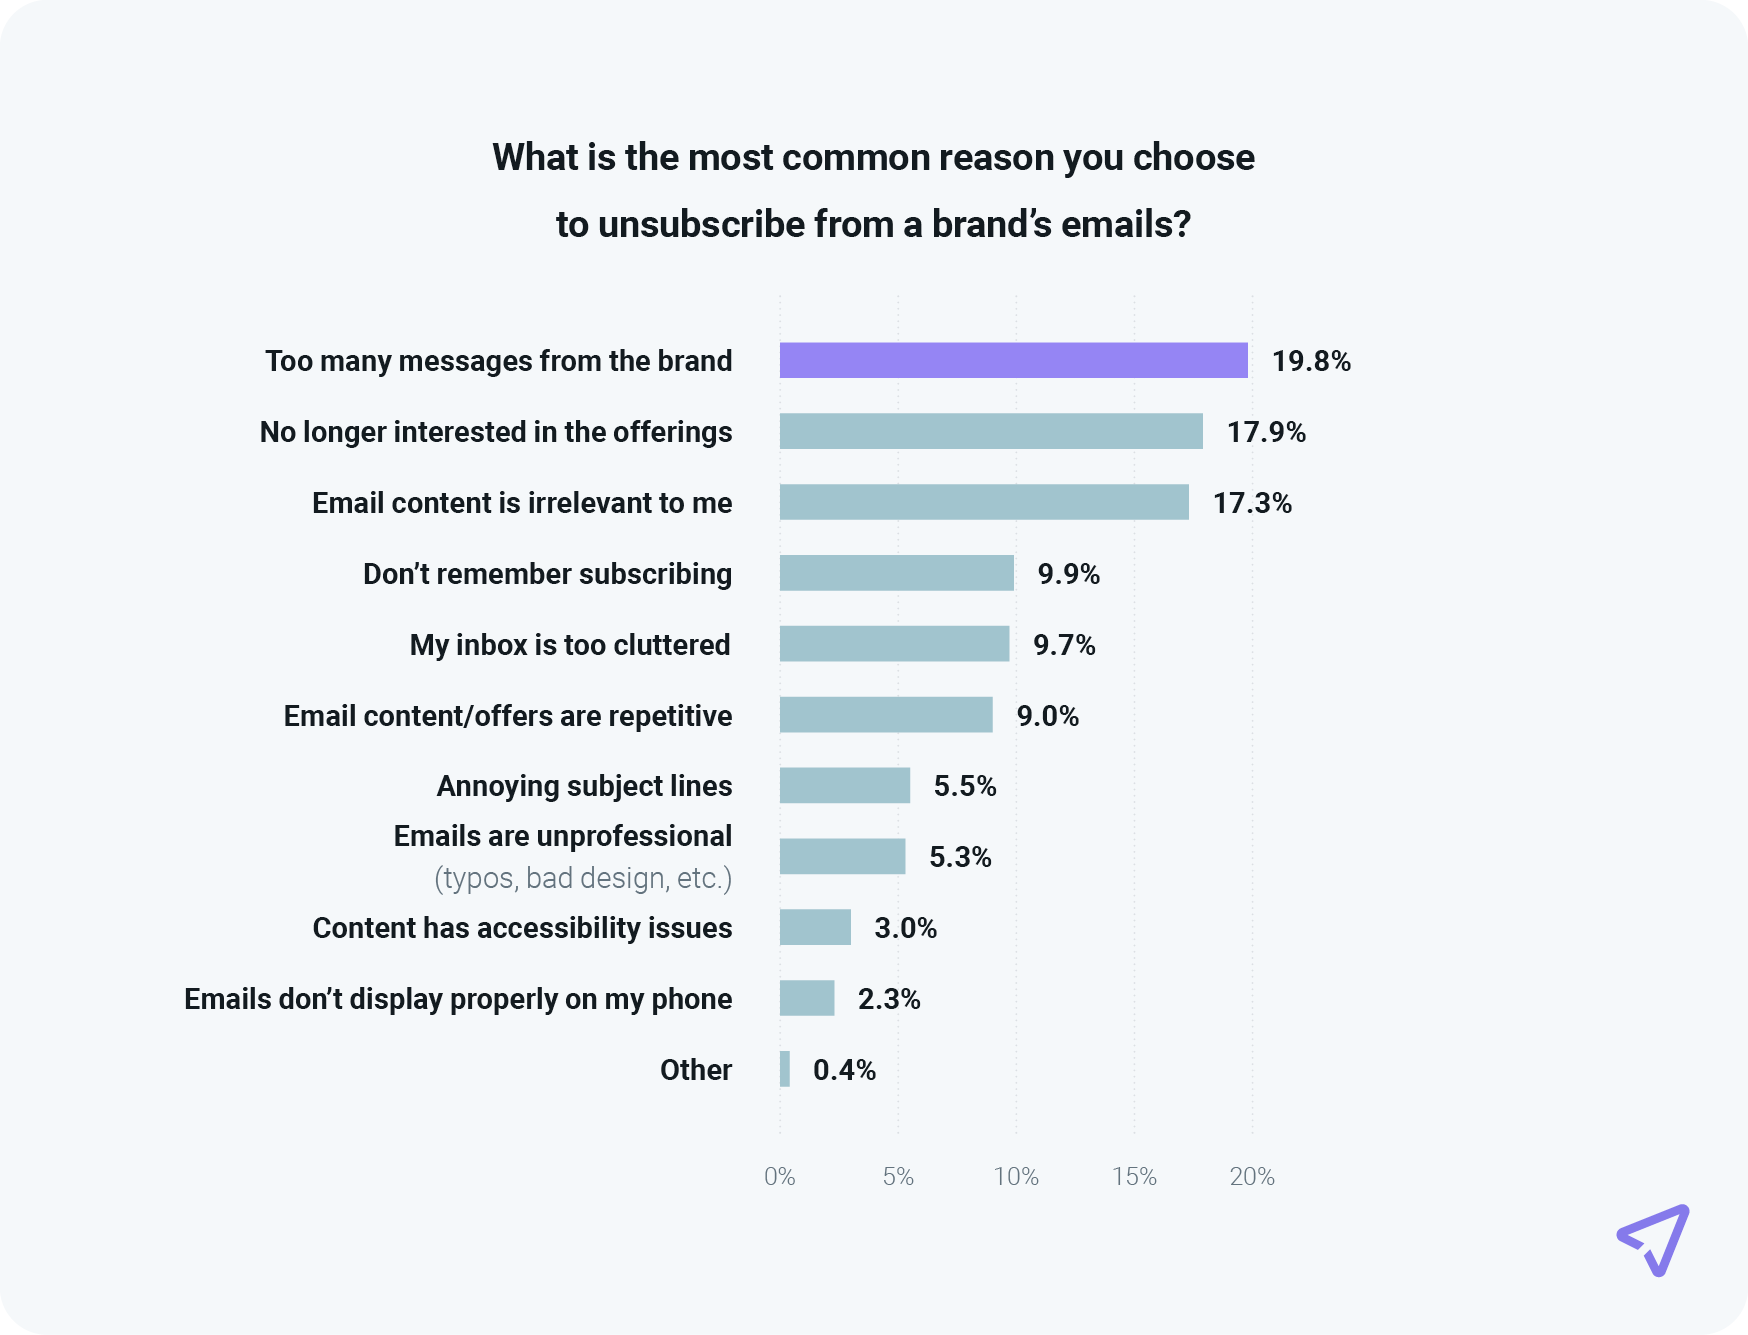 Chart shows top reasons people unsubscribe from emails